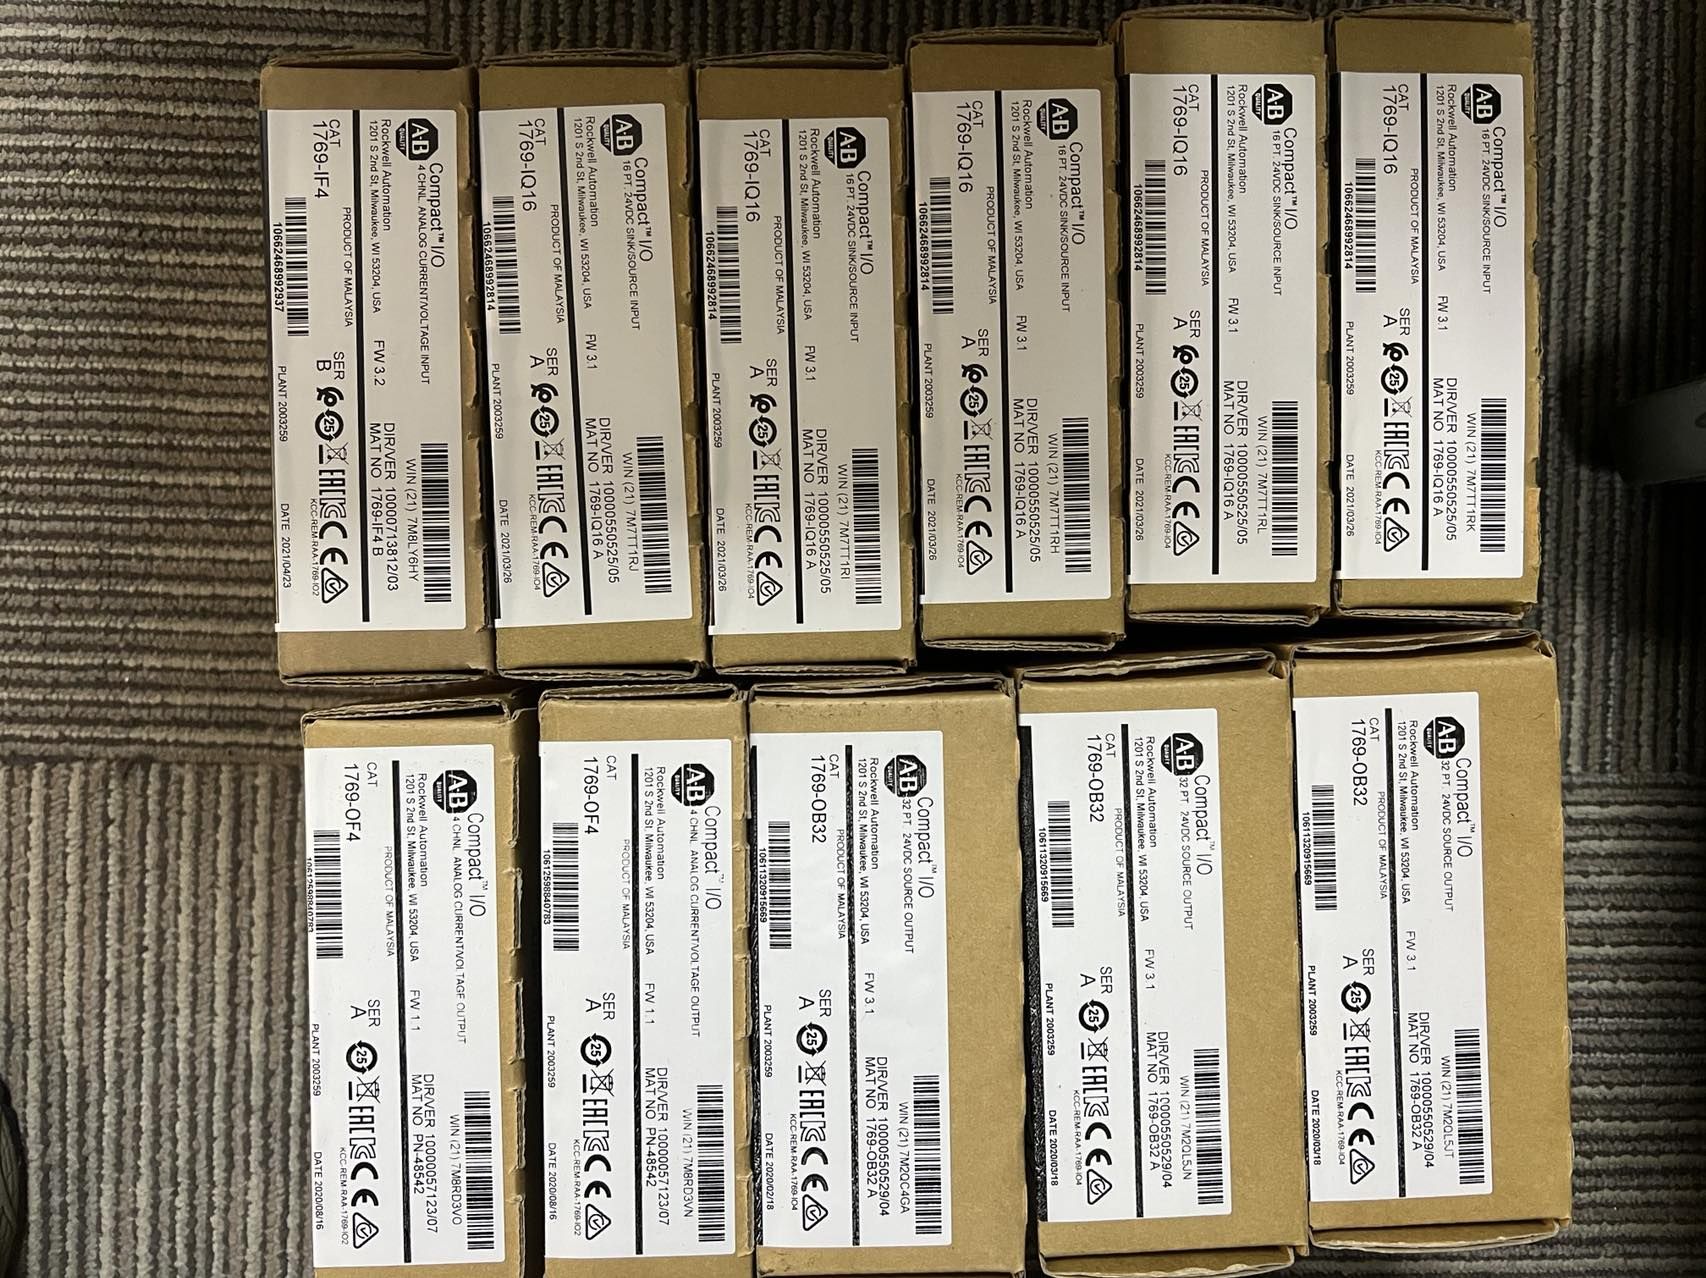 New arrival Allen Bradley 1756-A13 13 Slot ControlLogix Chassis in stock with good price.